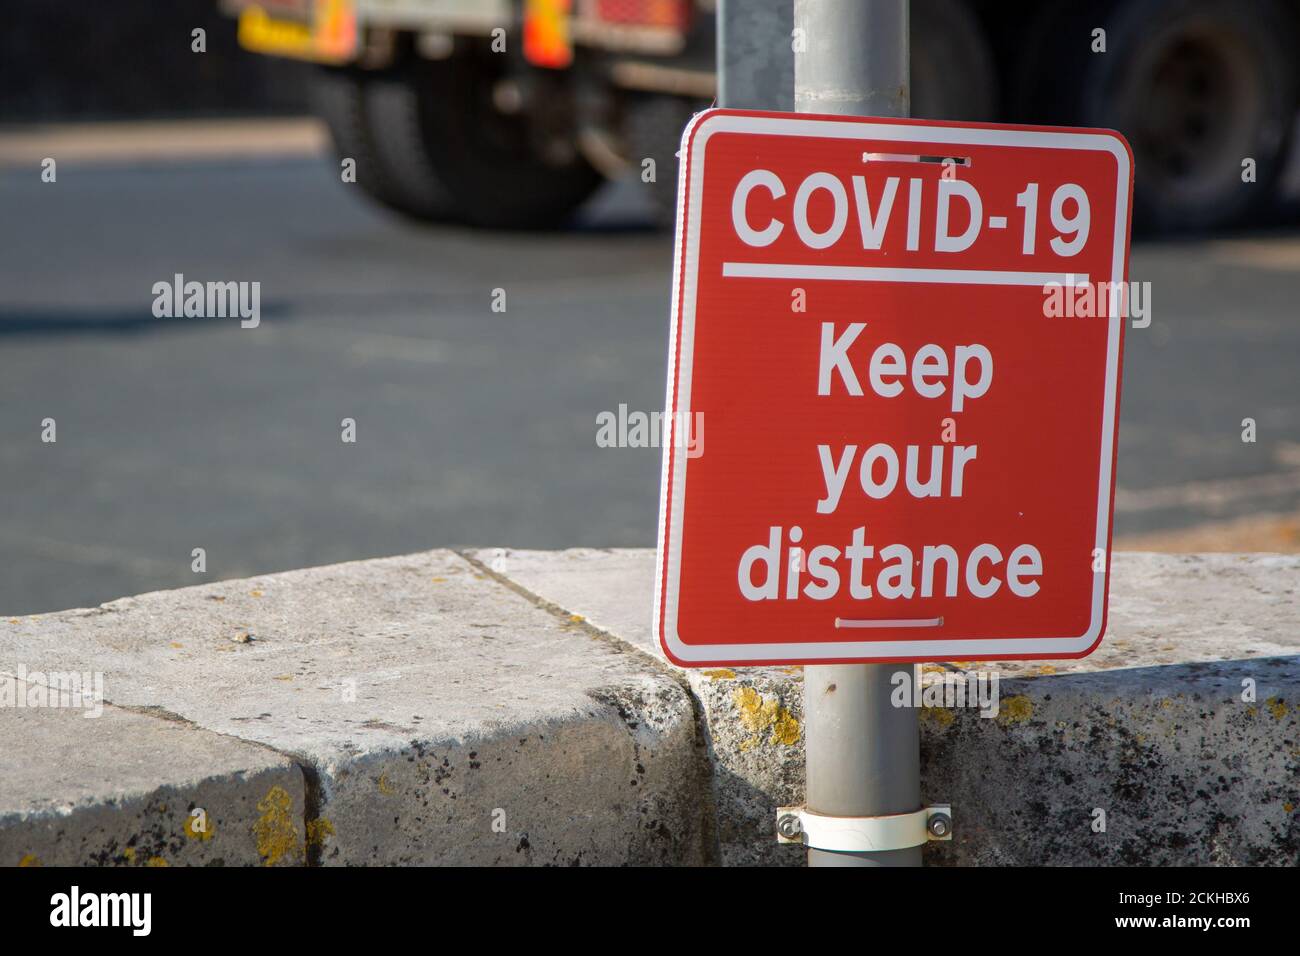 A sign reading Coviid-19 keep your distance attached to a lamppost Stock Photo